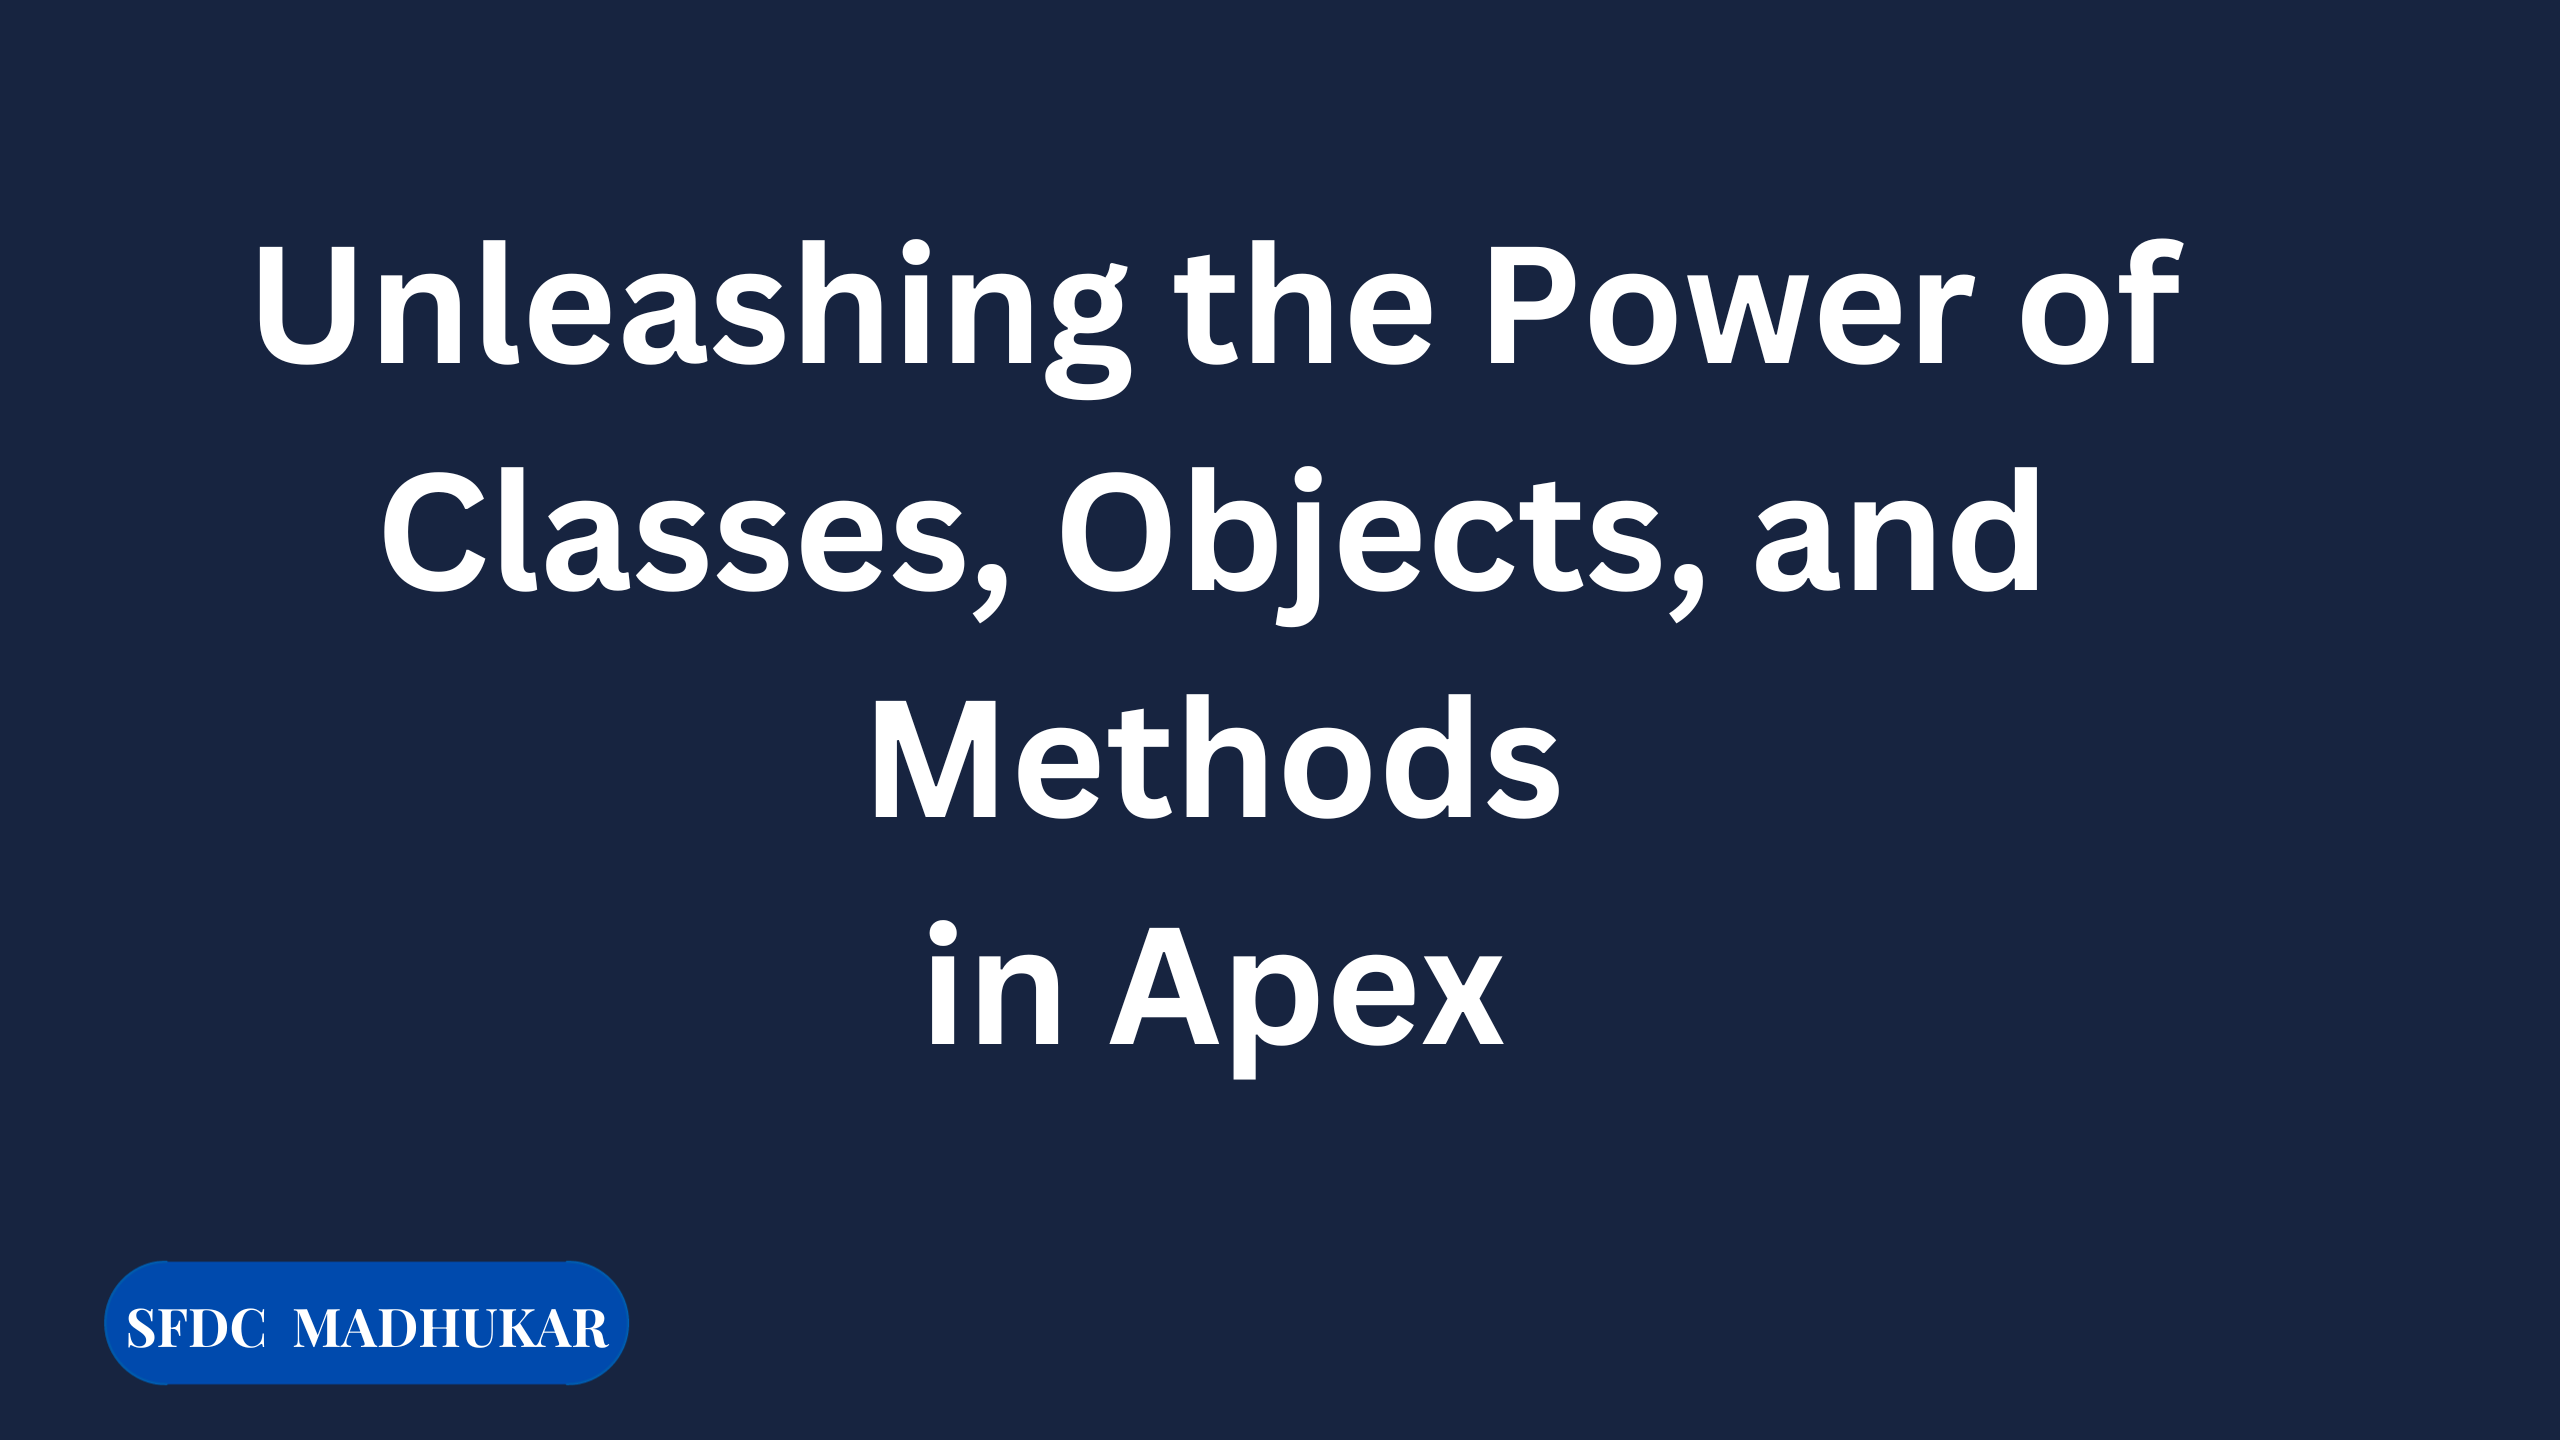 Unleashing the Power of Classes, Objects, and Methods in Apex